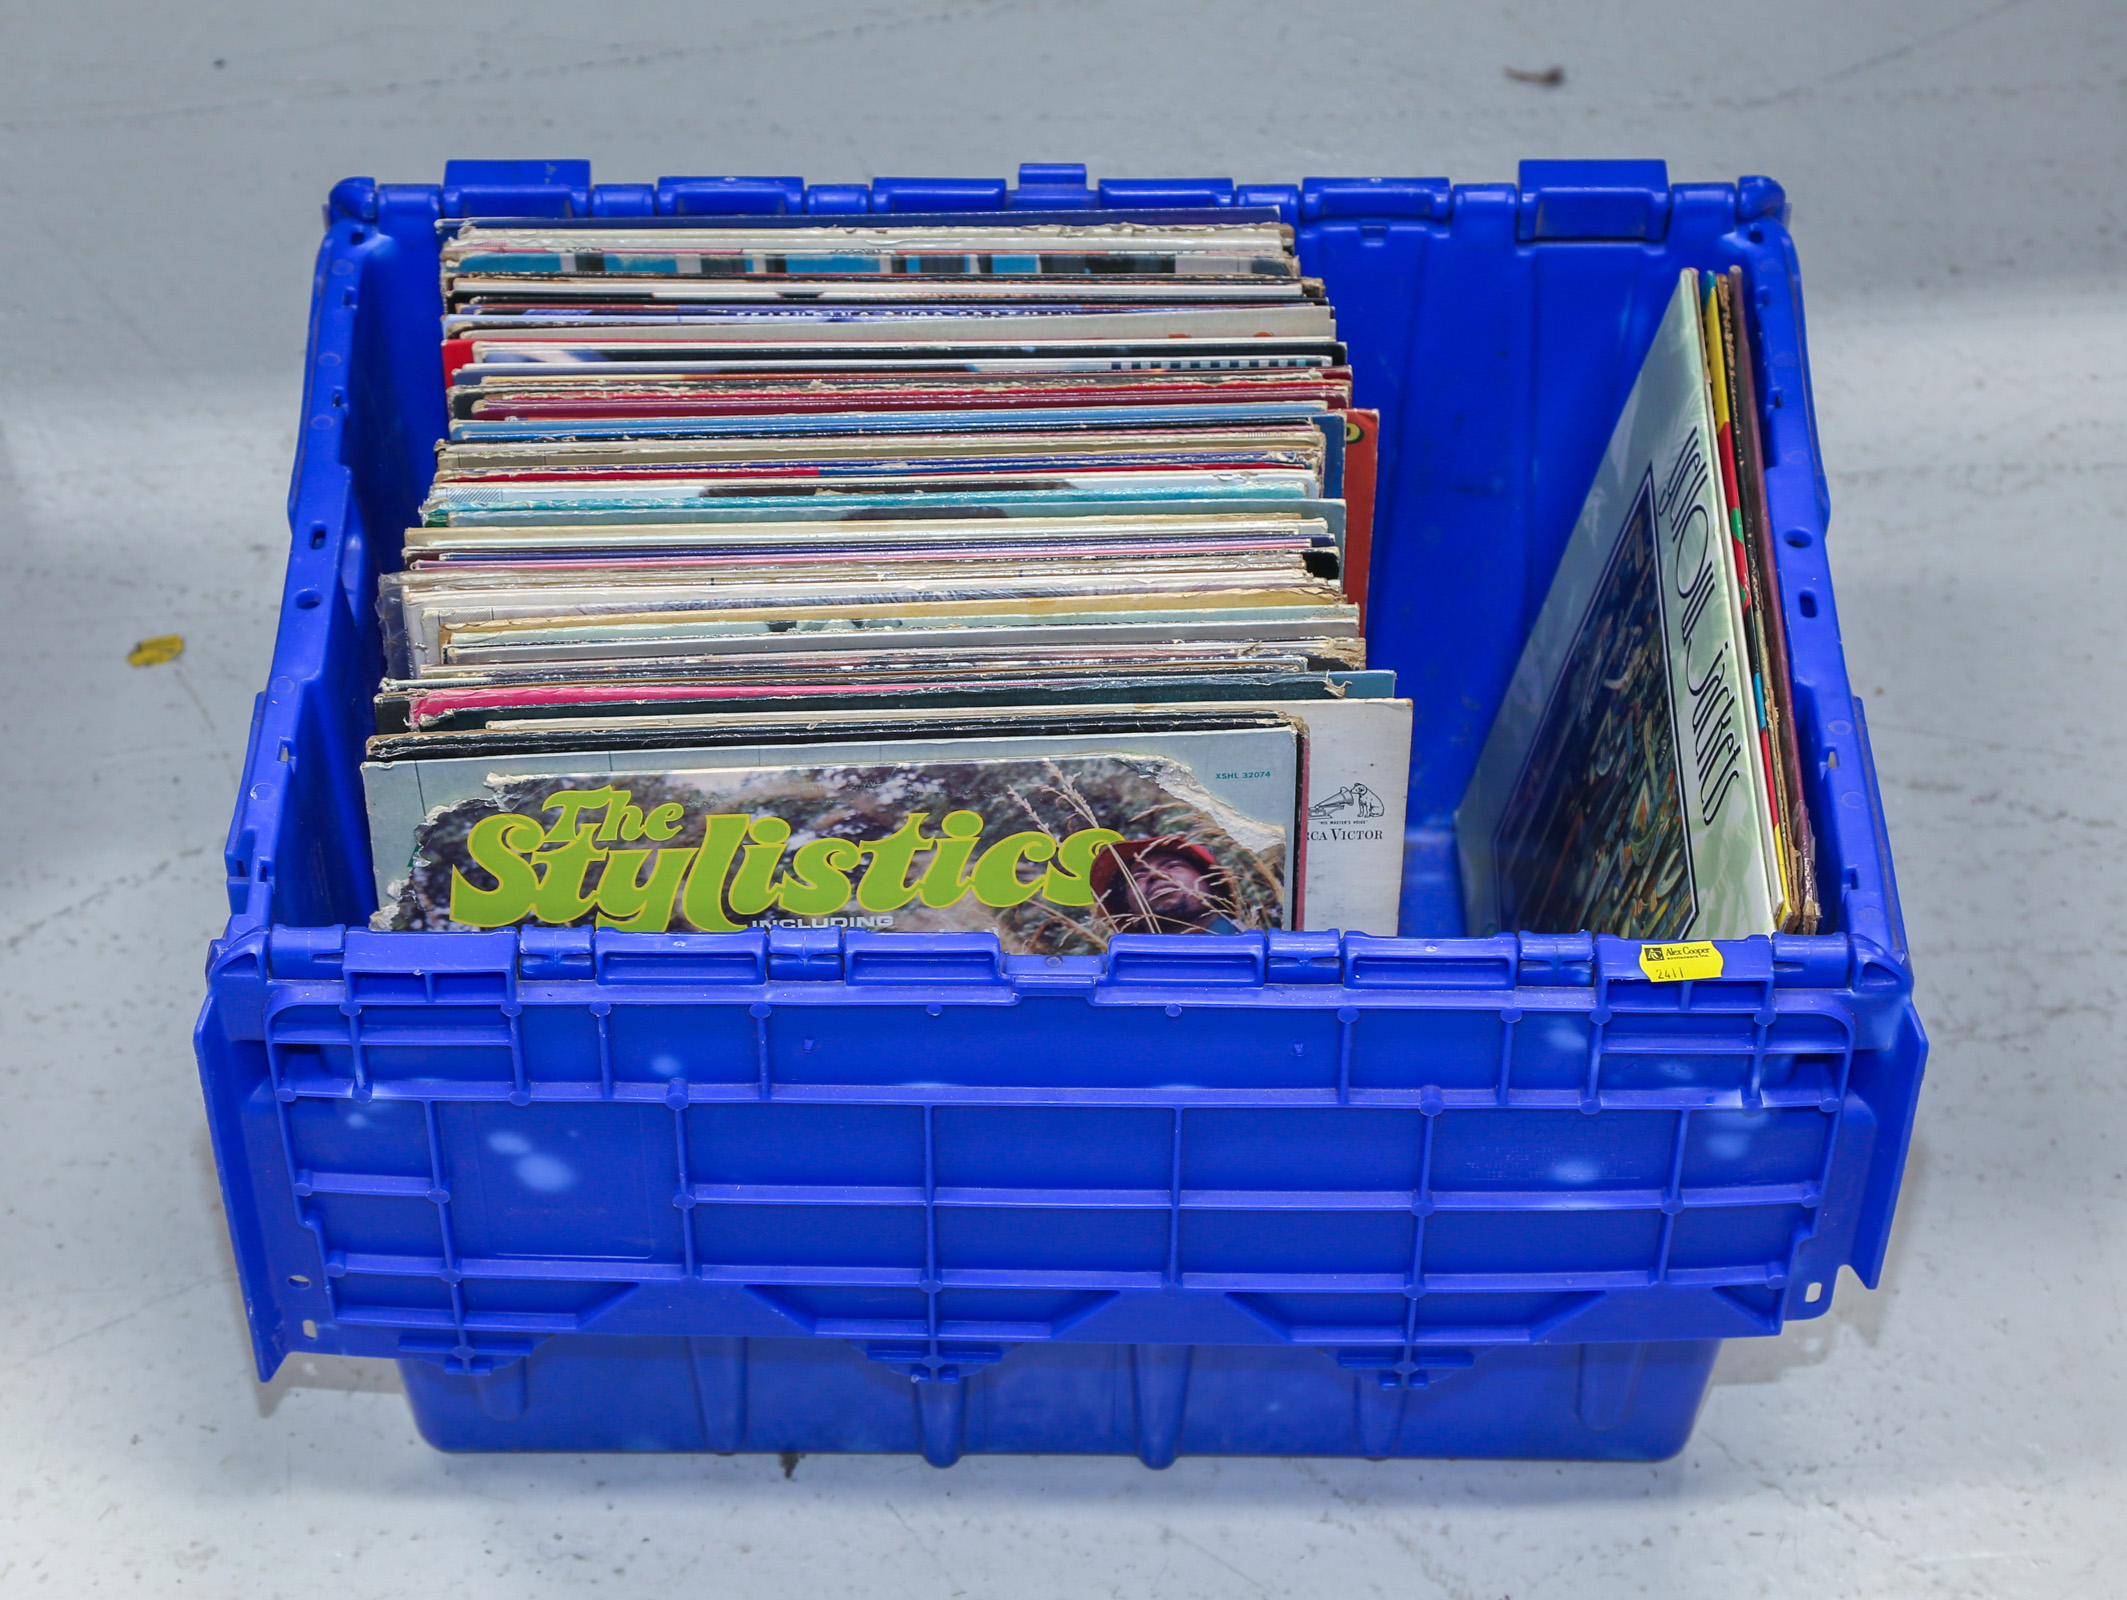 ASSORTMENT OF LPS 45S Including 2eaa82